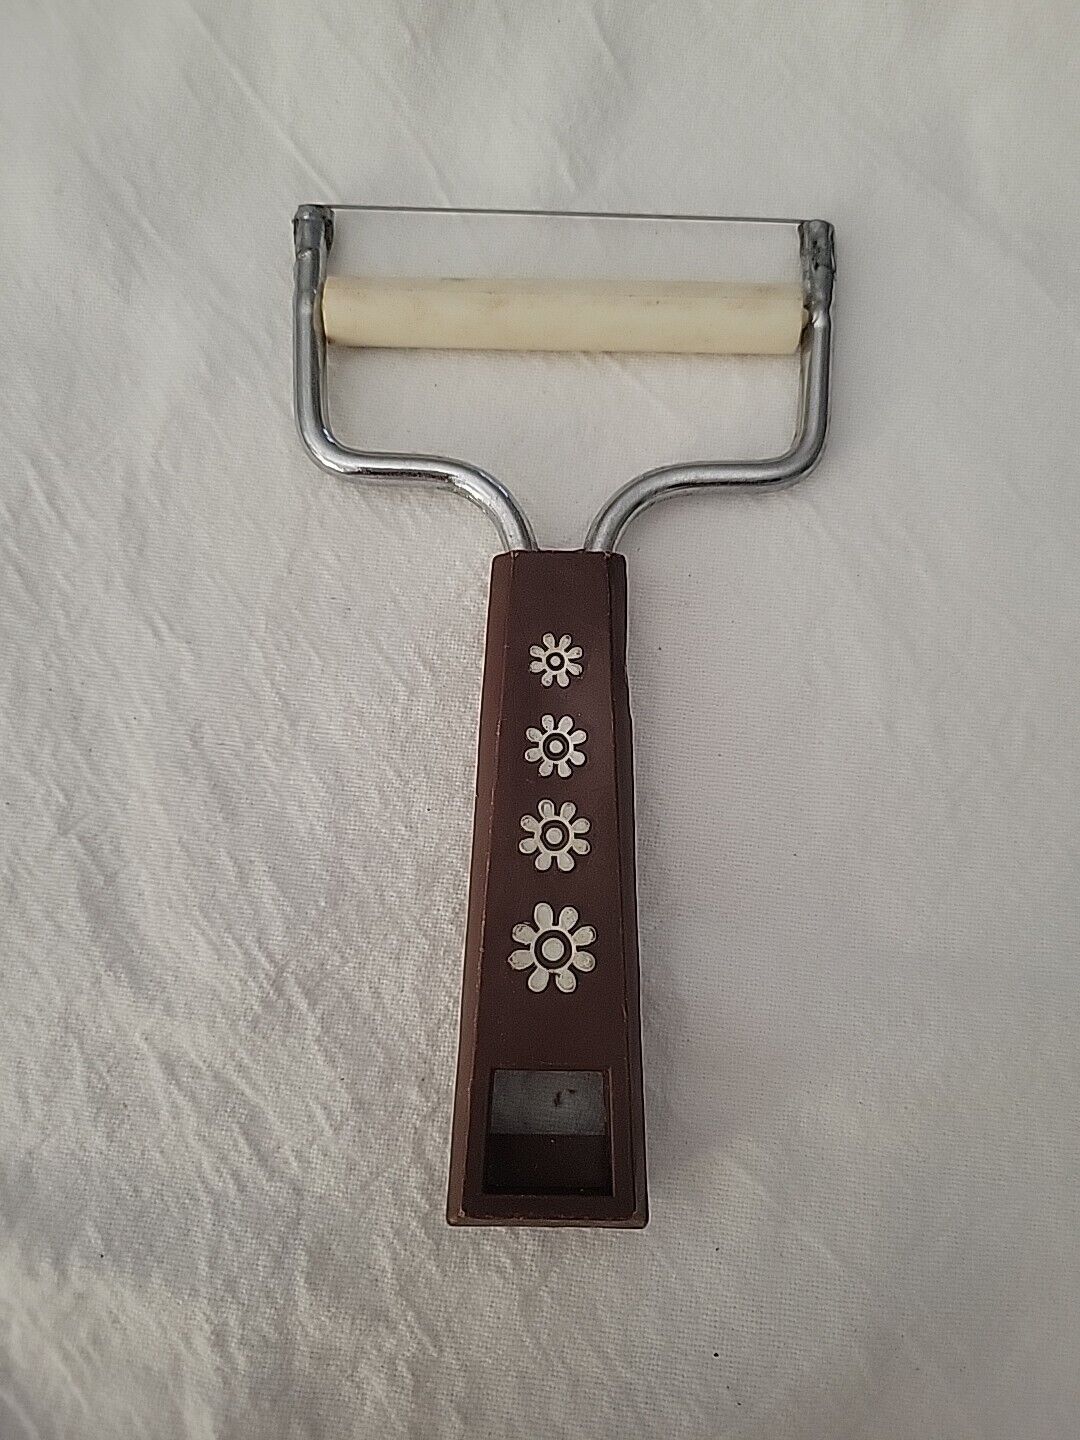 Vintage Travco Cheese Slicer Brown Handle with White Flowers